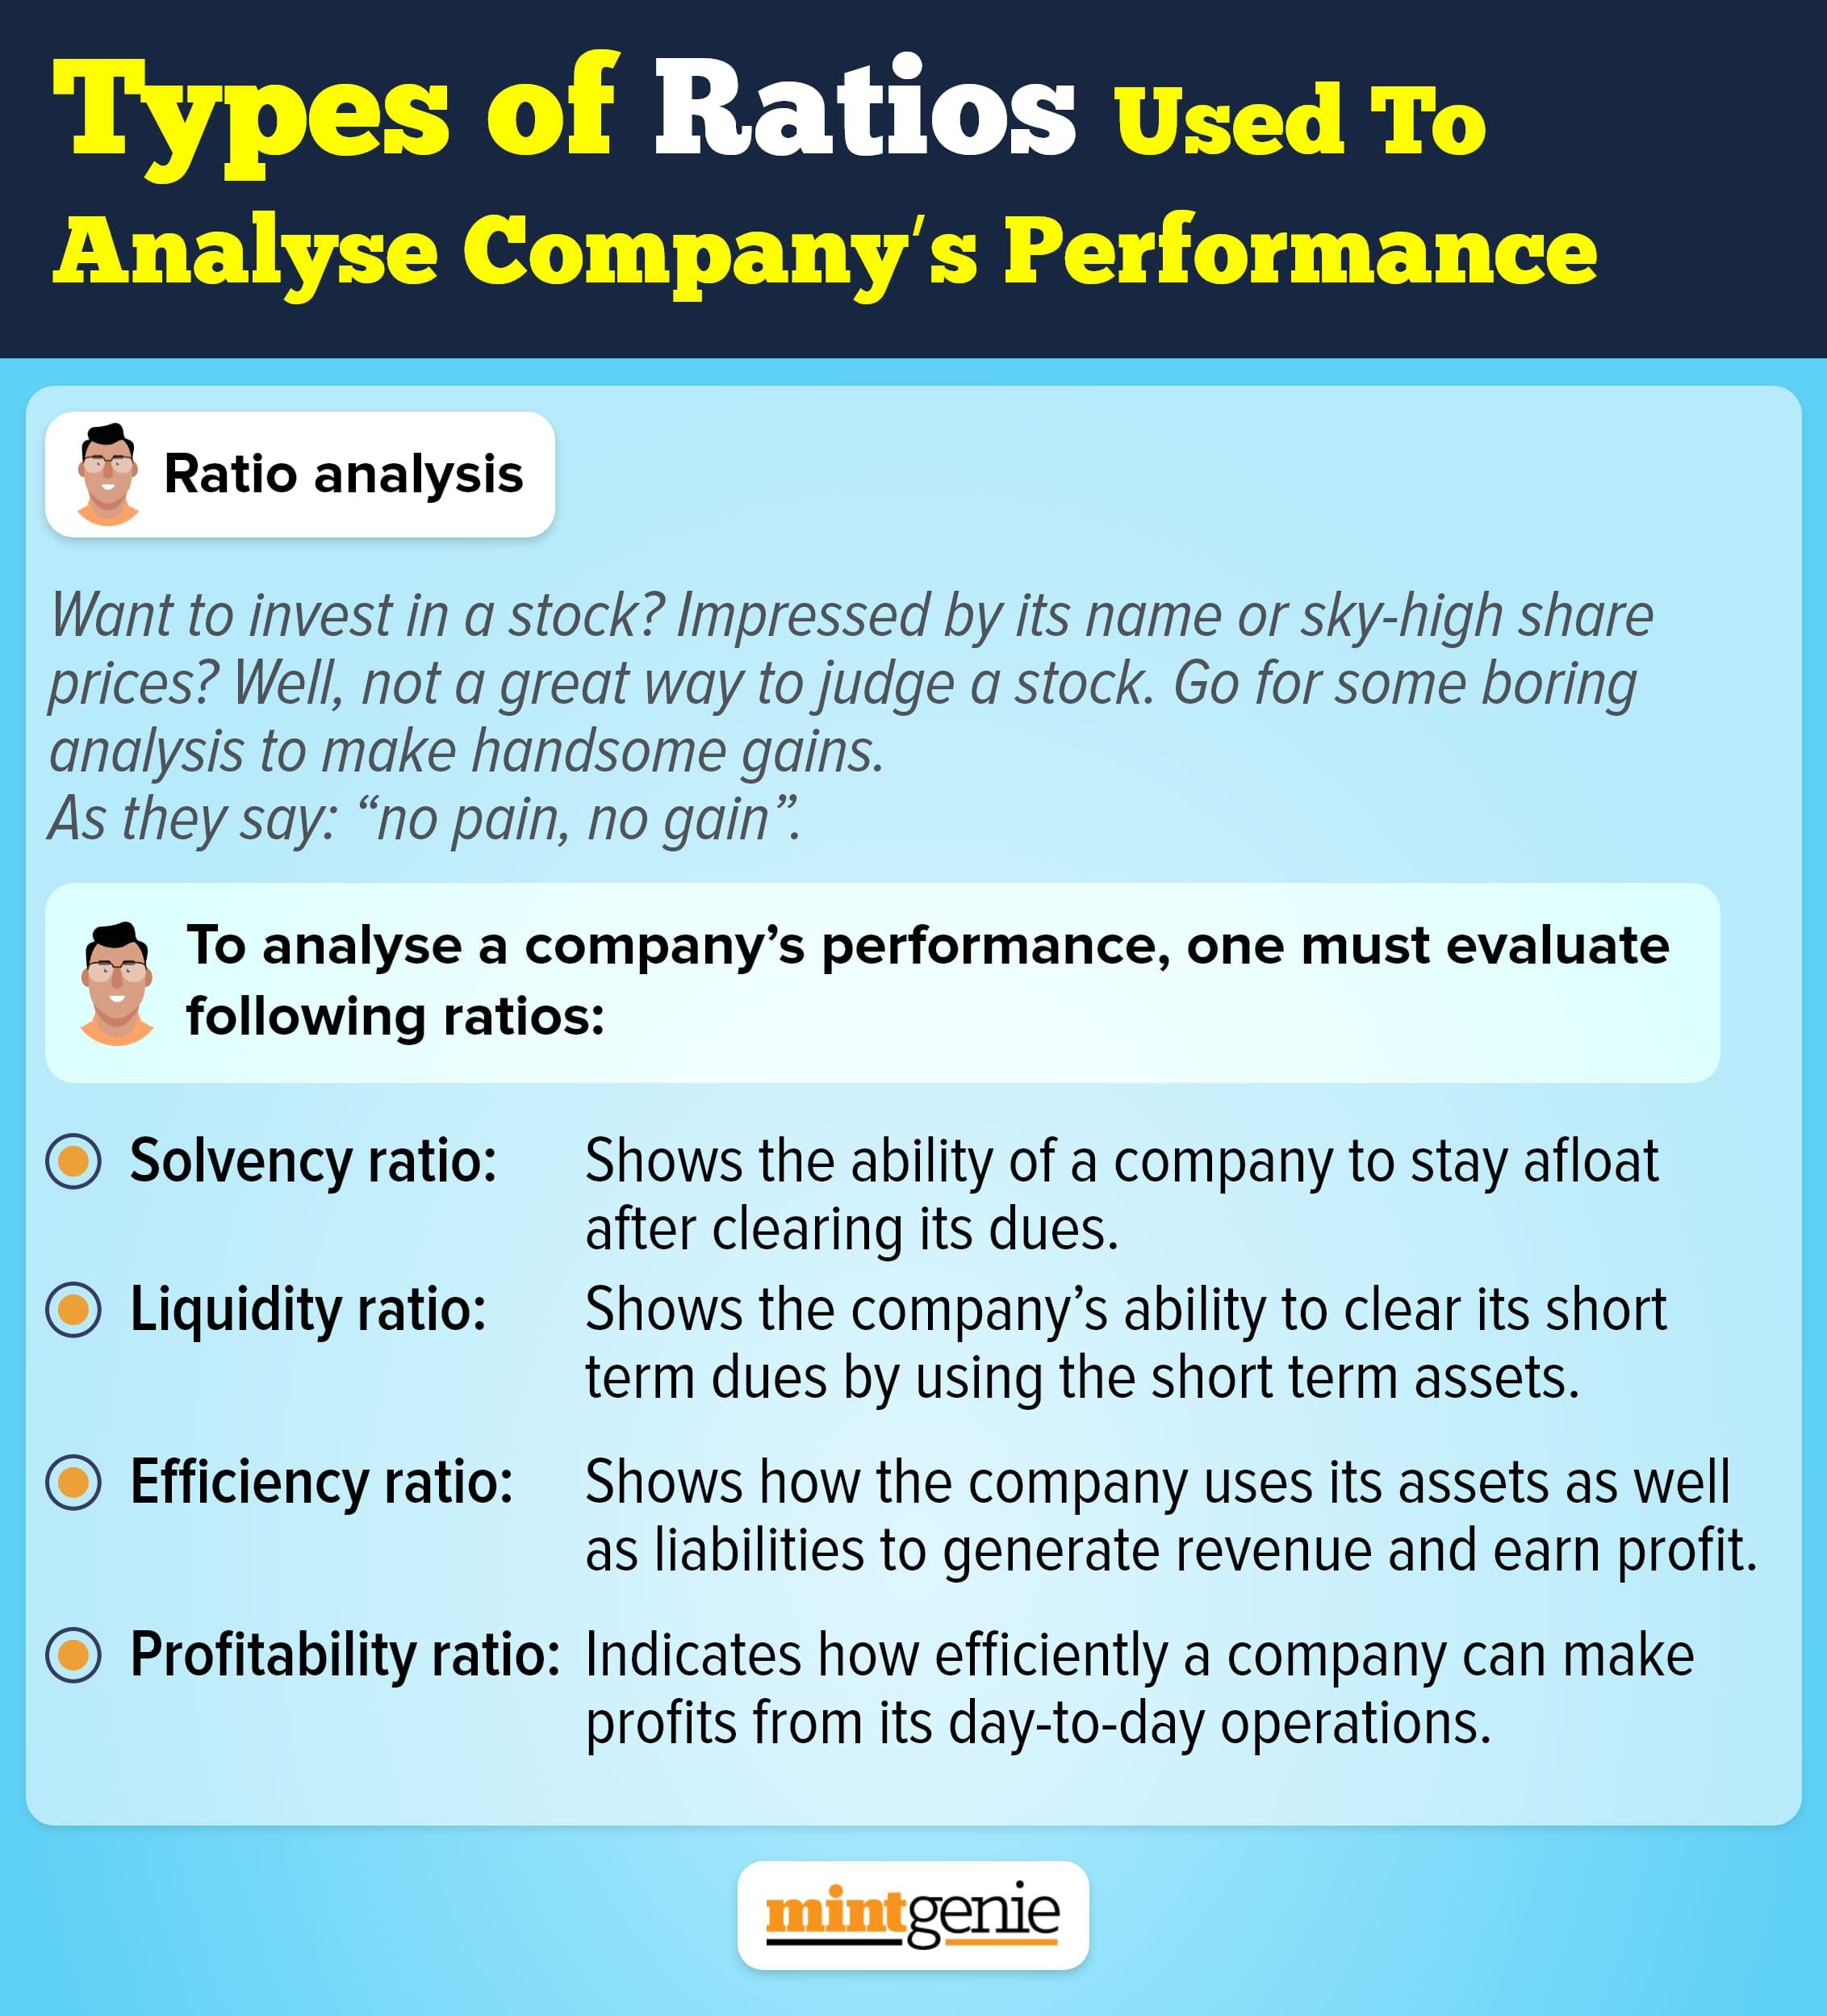 These are the types of ratios used to analyse a company's performance. &nbsp;